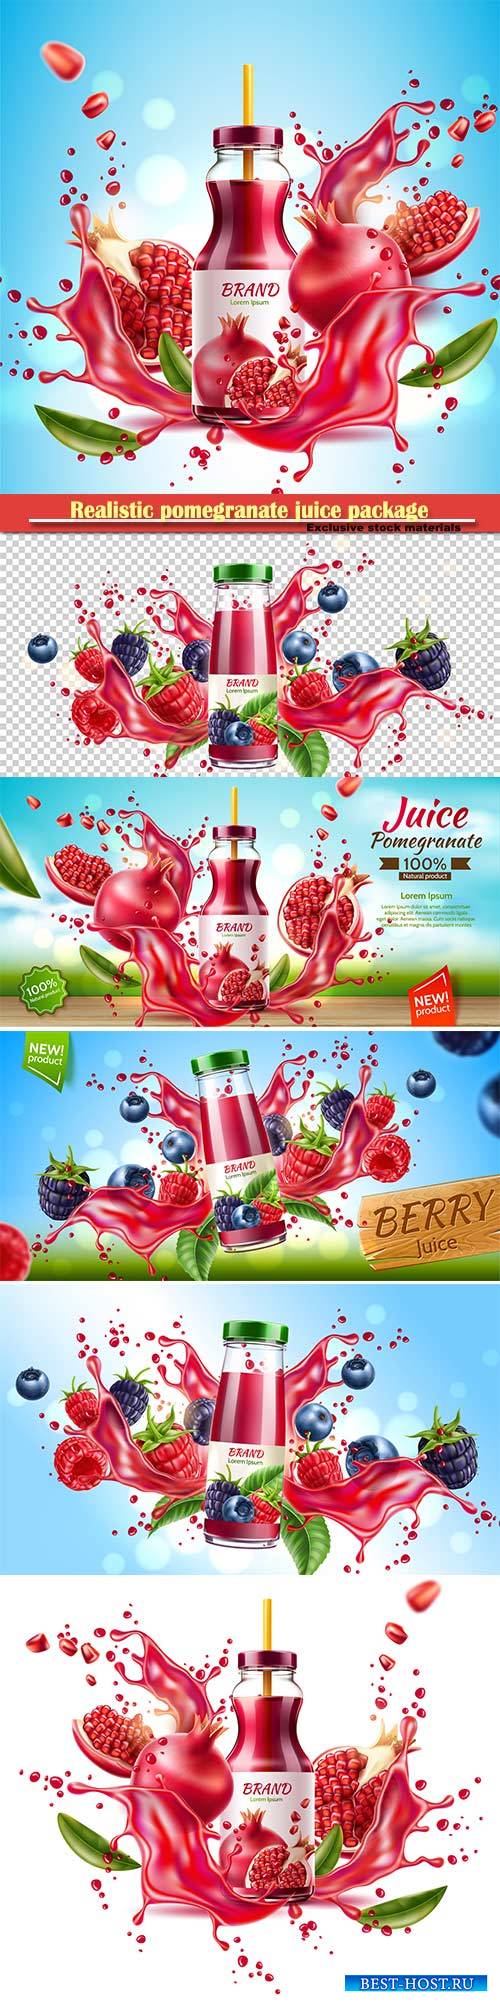 Realistic pomegranate juice package advertising design